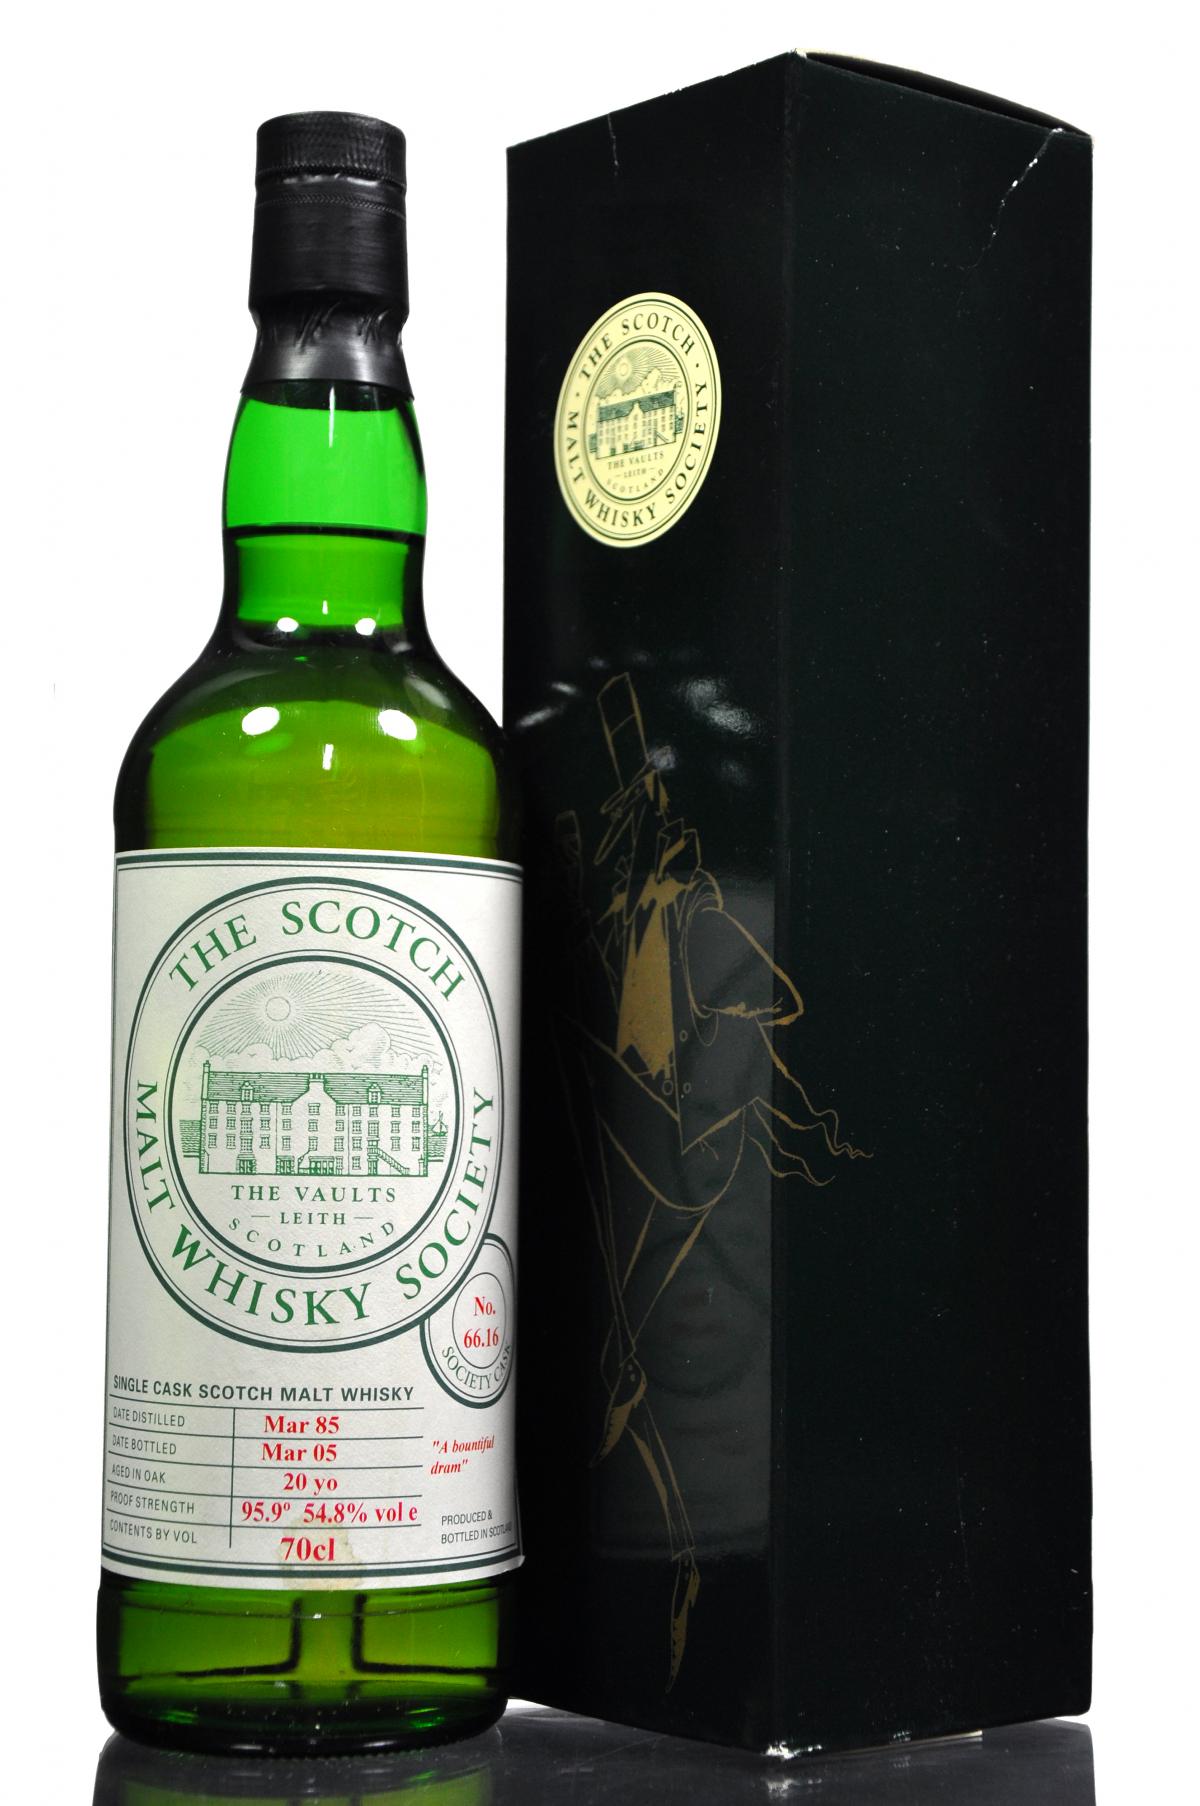 Ardmore 1985-2005 - 20 Year Old - SMWS 66.16 - A Bountiful Dram